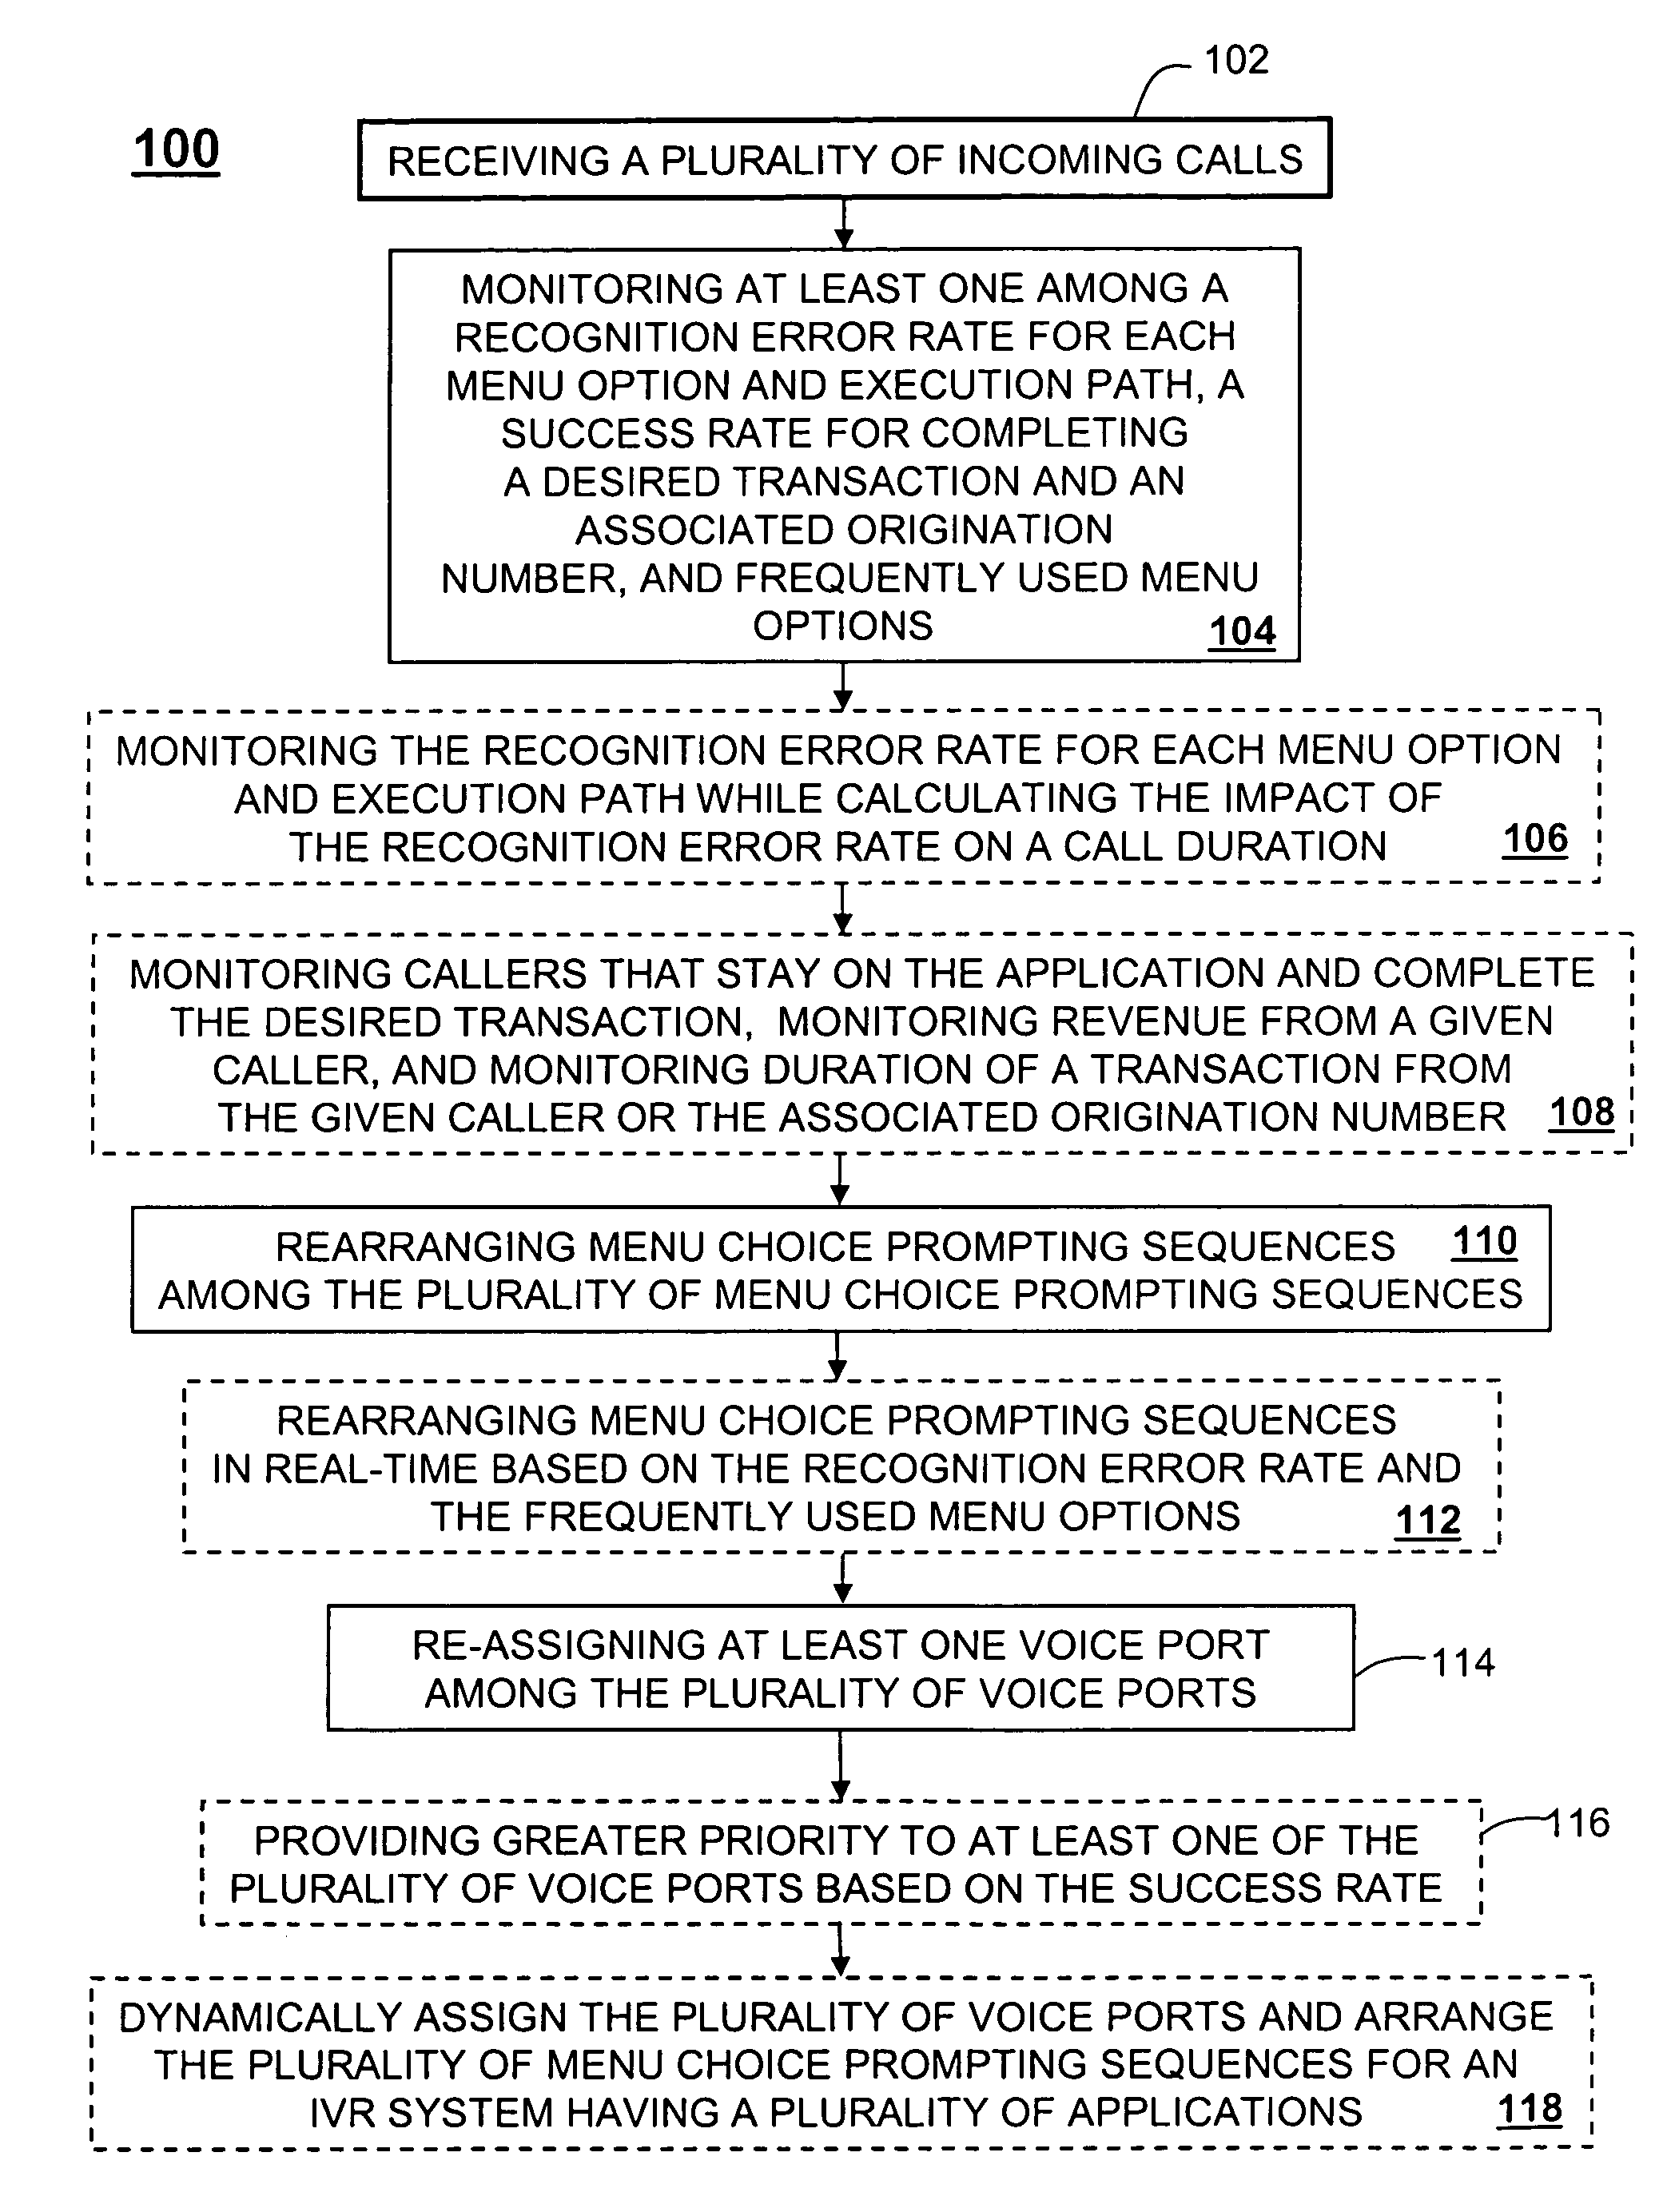 Dynamic allocation of voice ports and menu options in an interactive voice recognition system